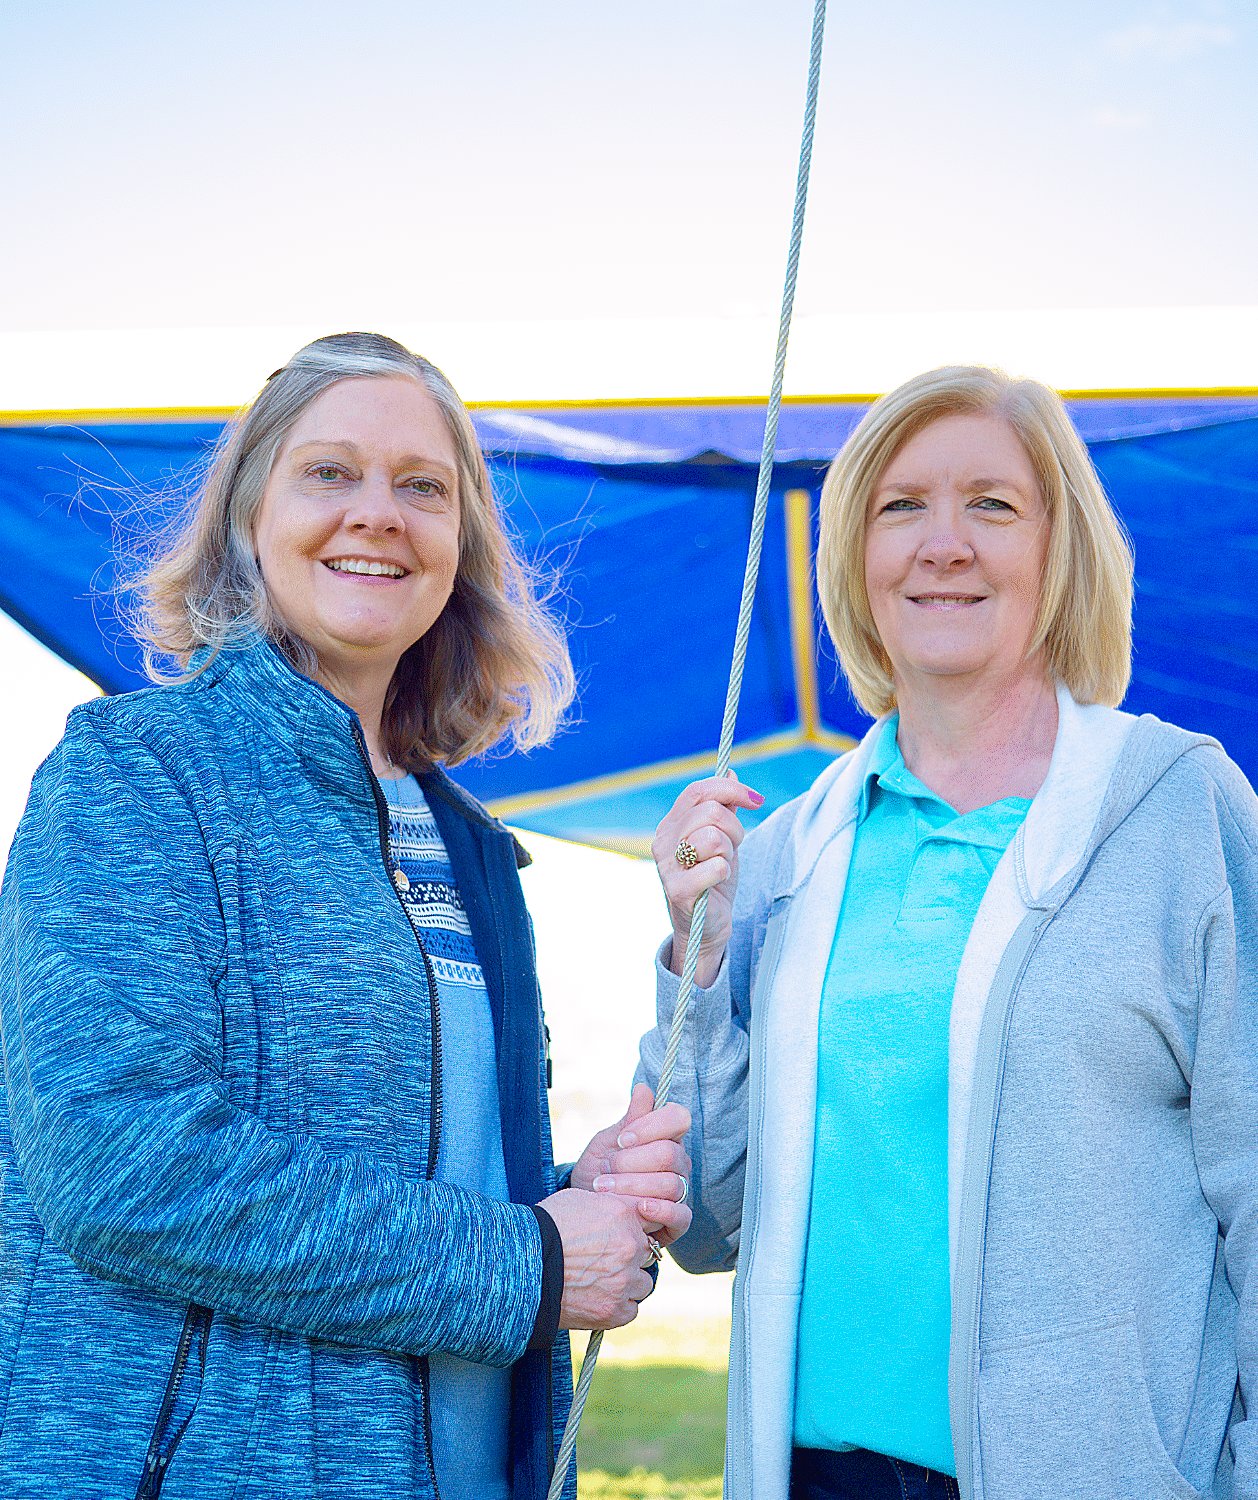 Lisa Bright, manager of the Mineola Civic Center and Becky Moore, who spearheaded the Kiwanis project to bring shade to the splash park, seemed pleased to see the sails come to fruition.